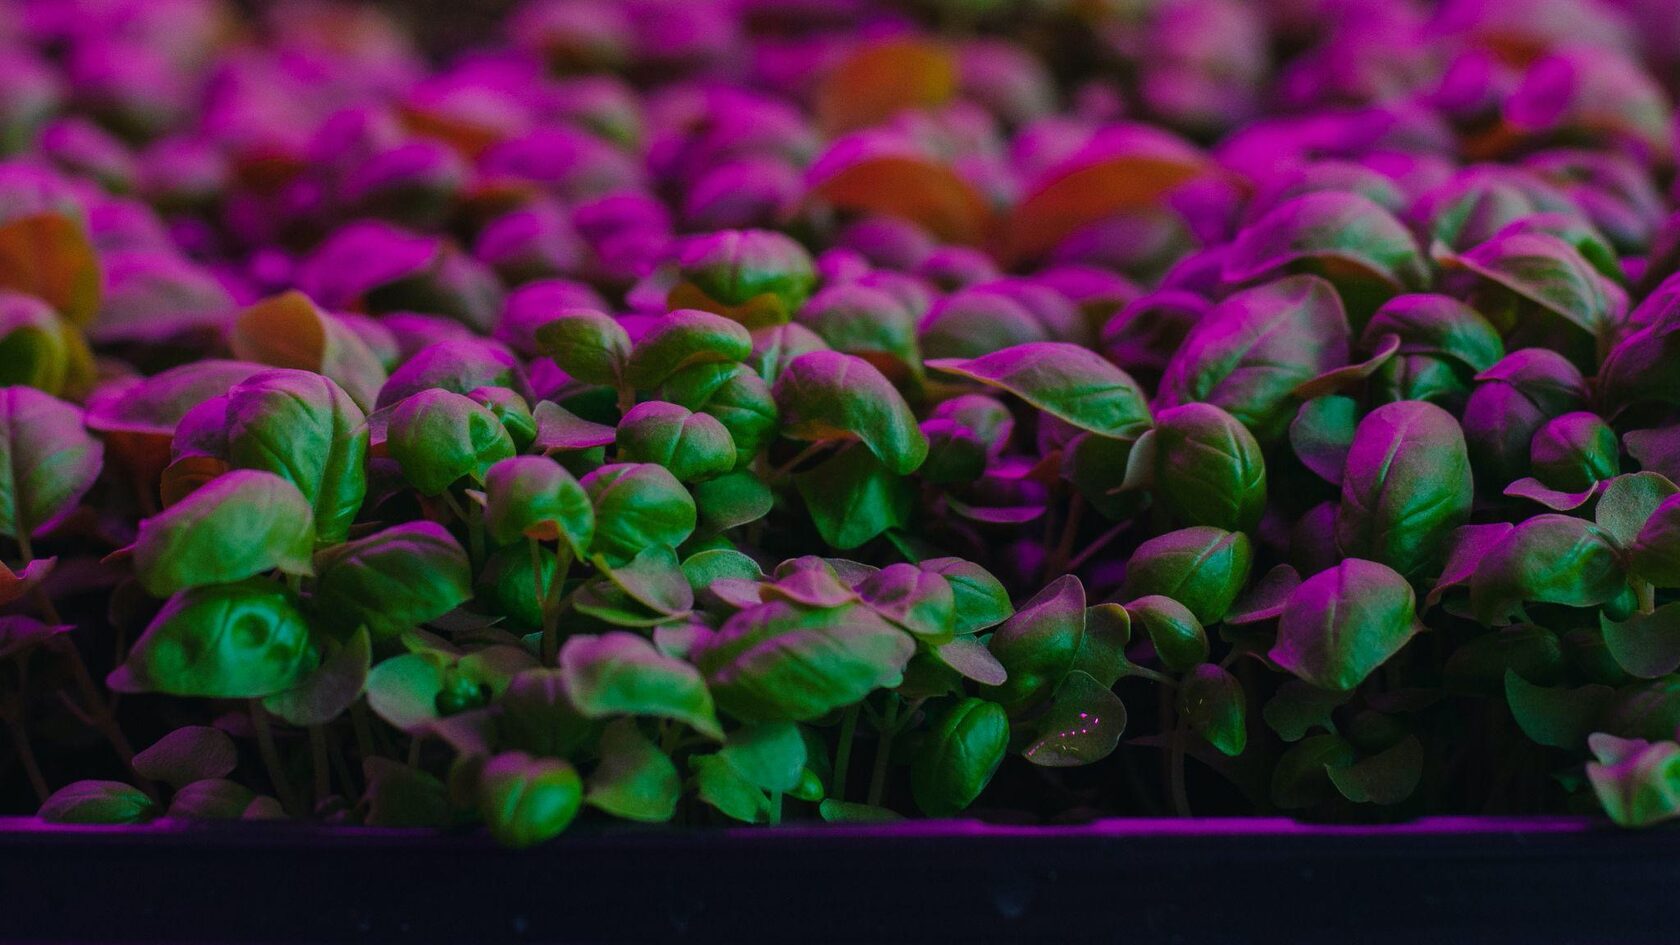 A Vertical Farming Hydroponics Technology to Grow Microgreens at industrial scale